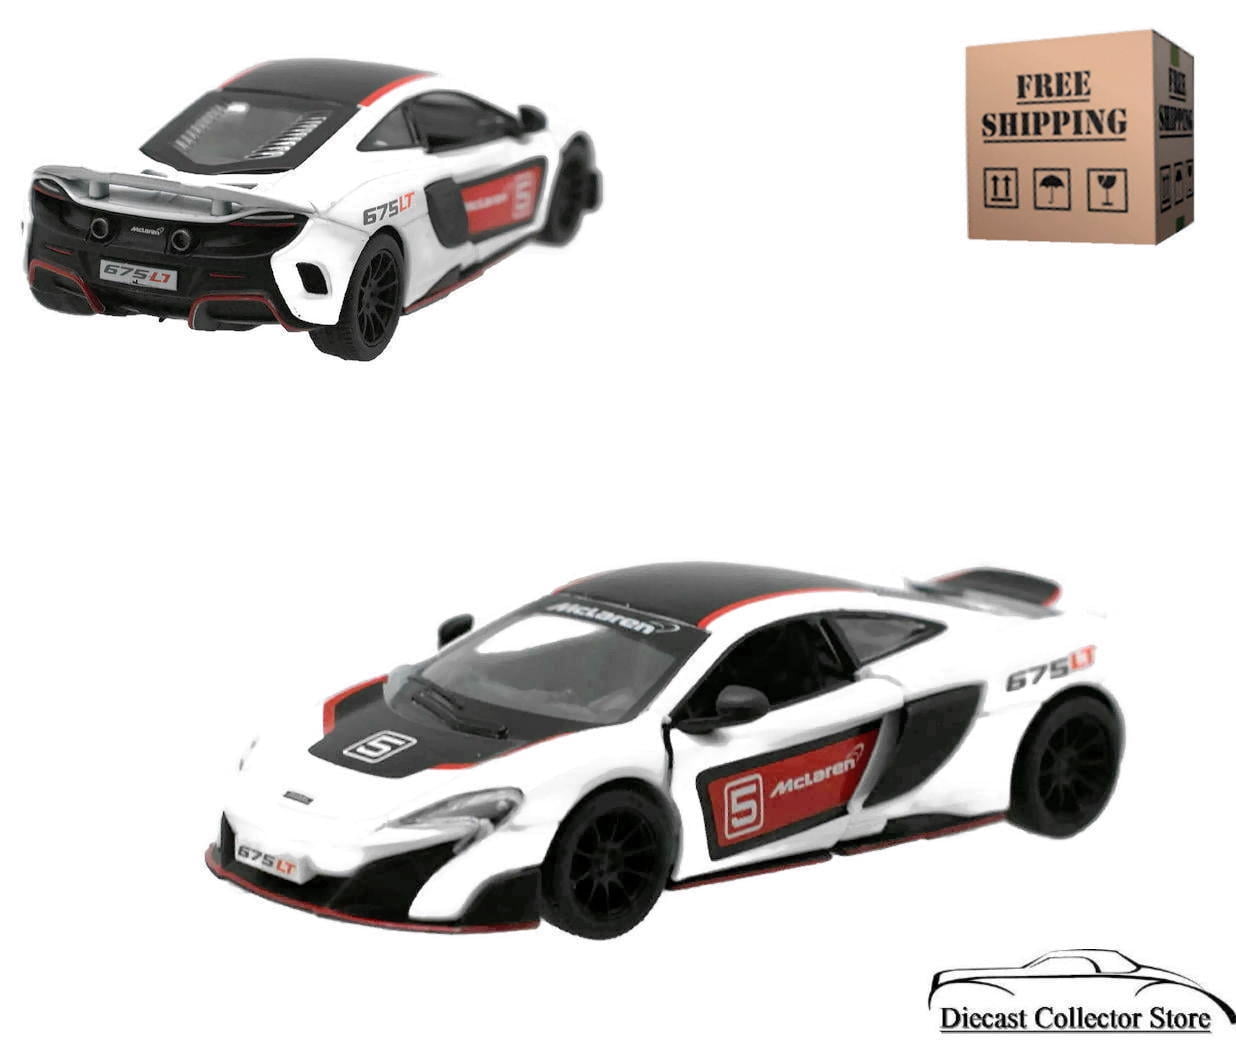 McLAREN 675LT PERSONALISED NAME PLATES NEW Toy Car MODEL DAD BOY BIRTHDAY GIFT